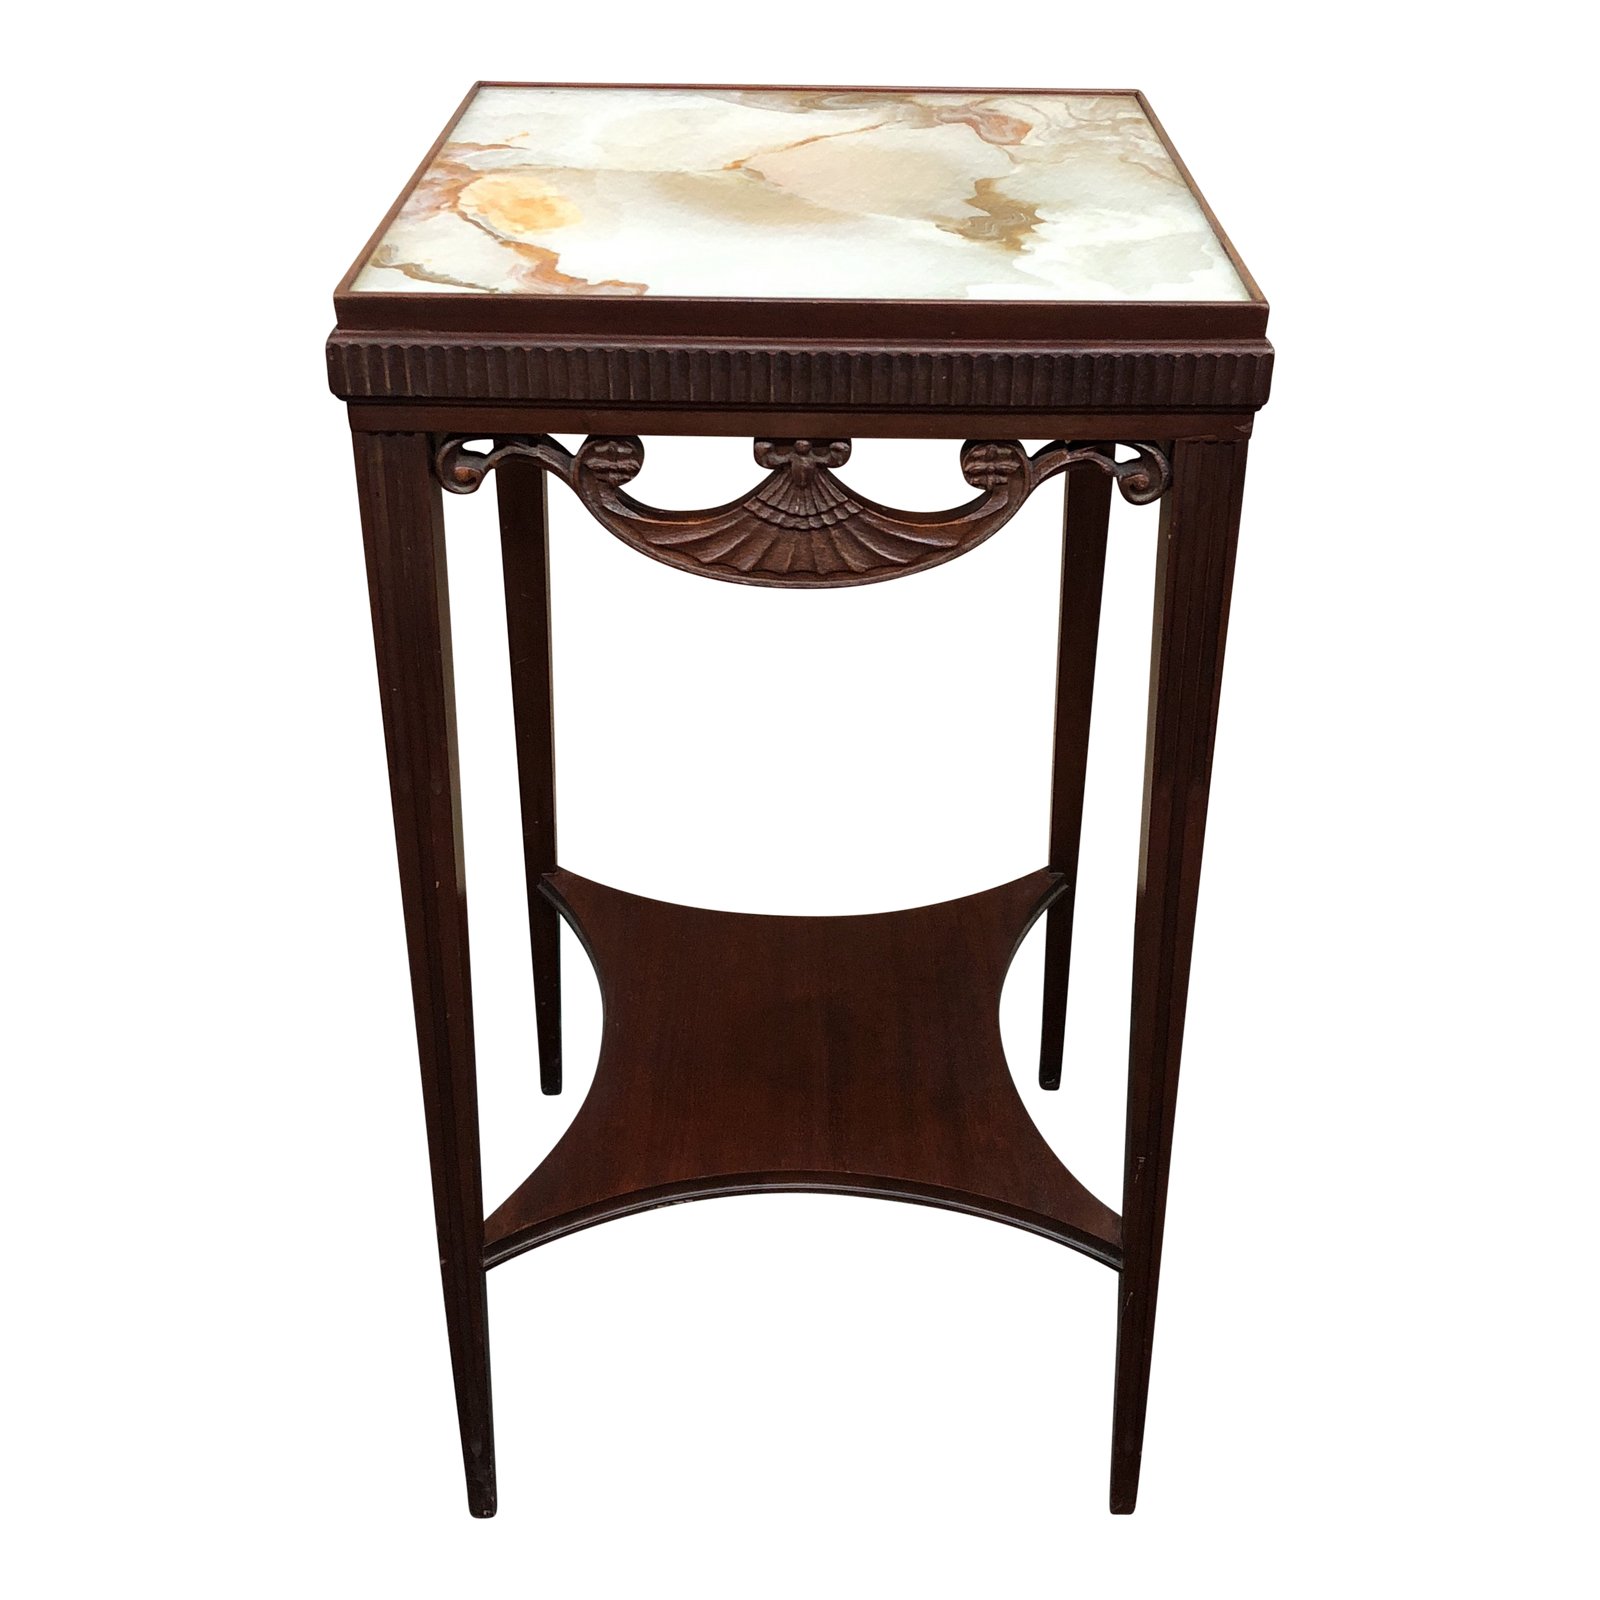 antique faux marble painted glass top accent table chairish metal furniture narrow end tables for living room nate berkus coffee red tablecloth solid cherry dining jofran with